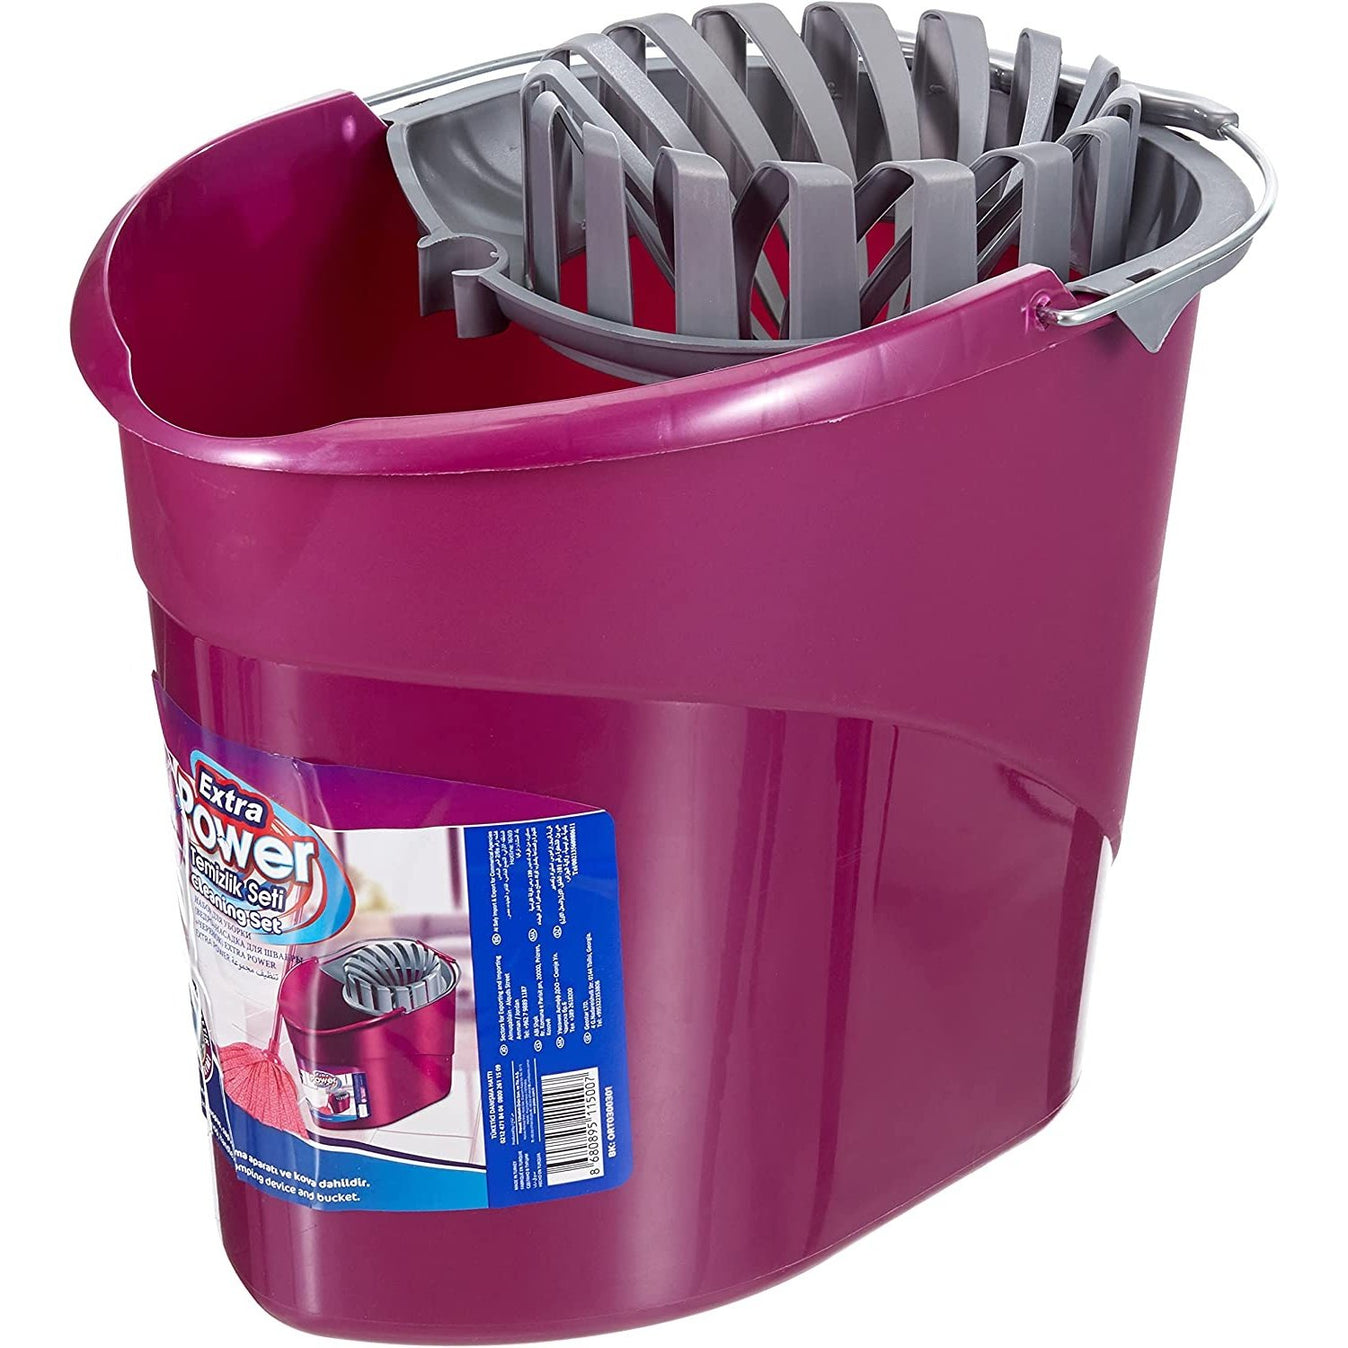 Get Your Cleaning Done Efficiently with Parex Extra Power Mop Bucket Set | Supply Master | Accra, Ghana Janitorial & Cleaning Buy Tools hardware Building materials